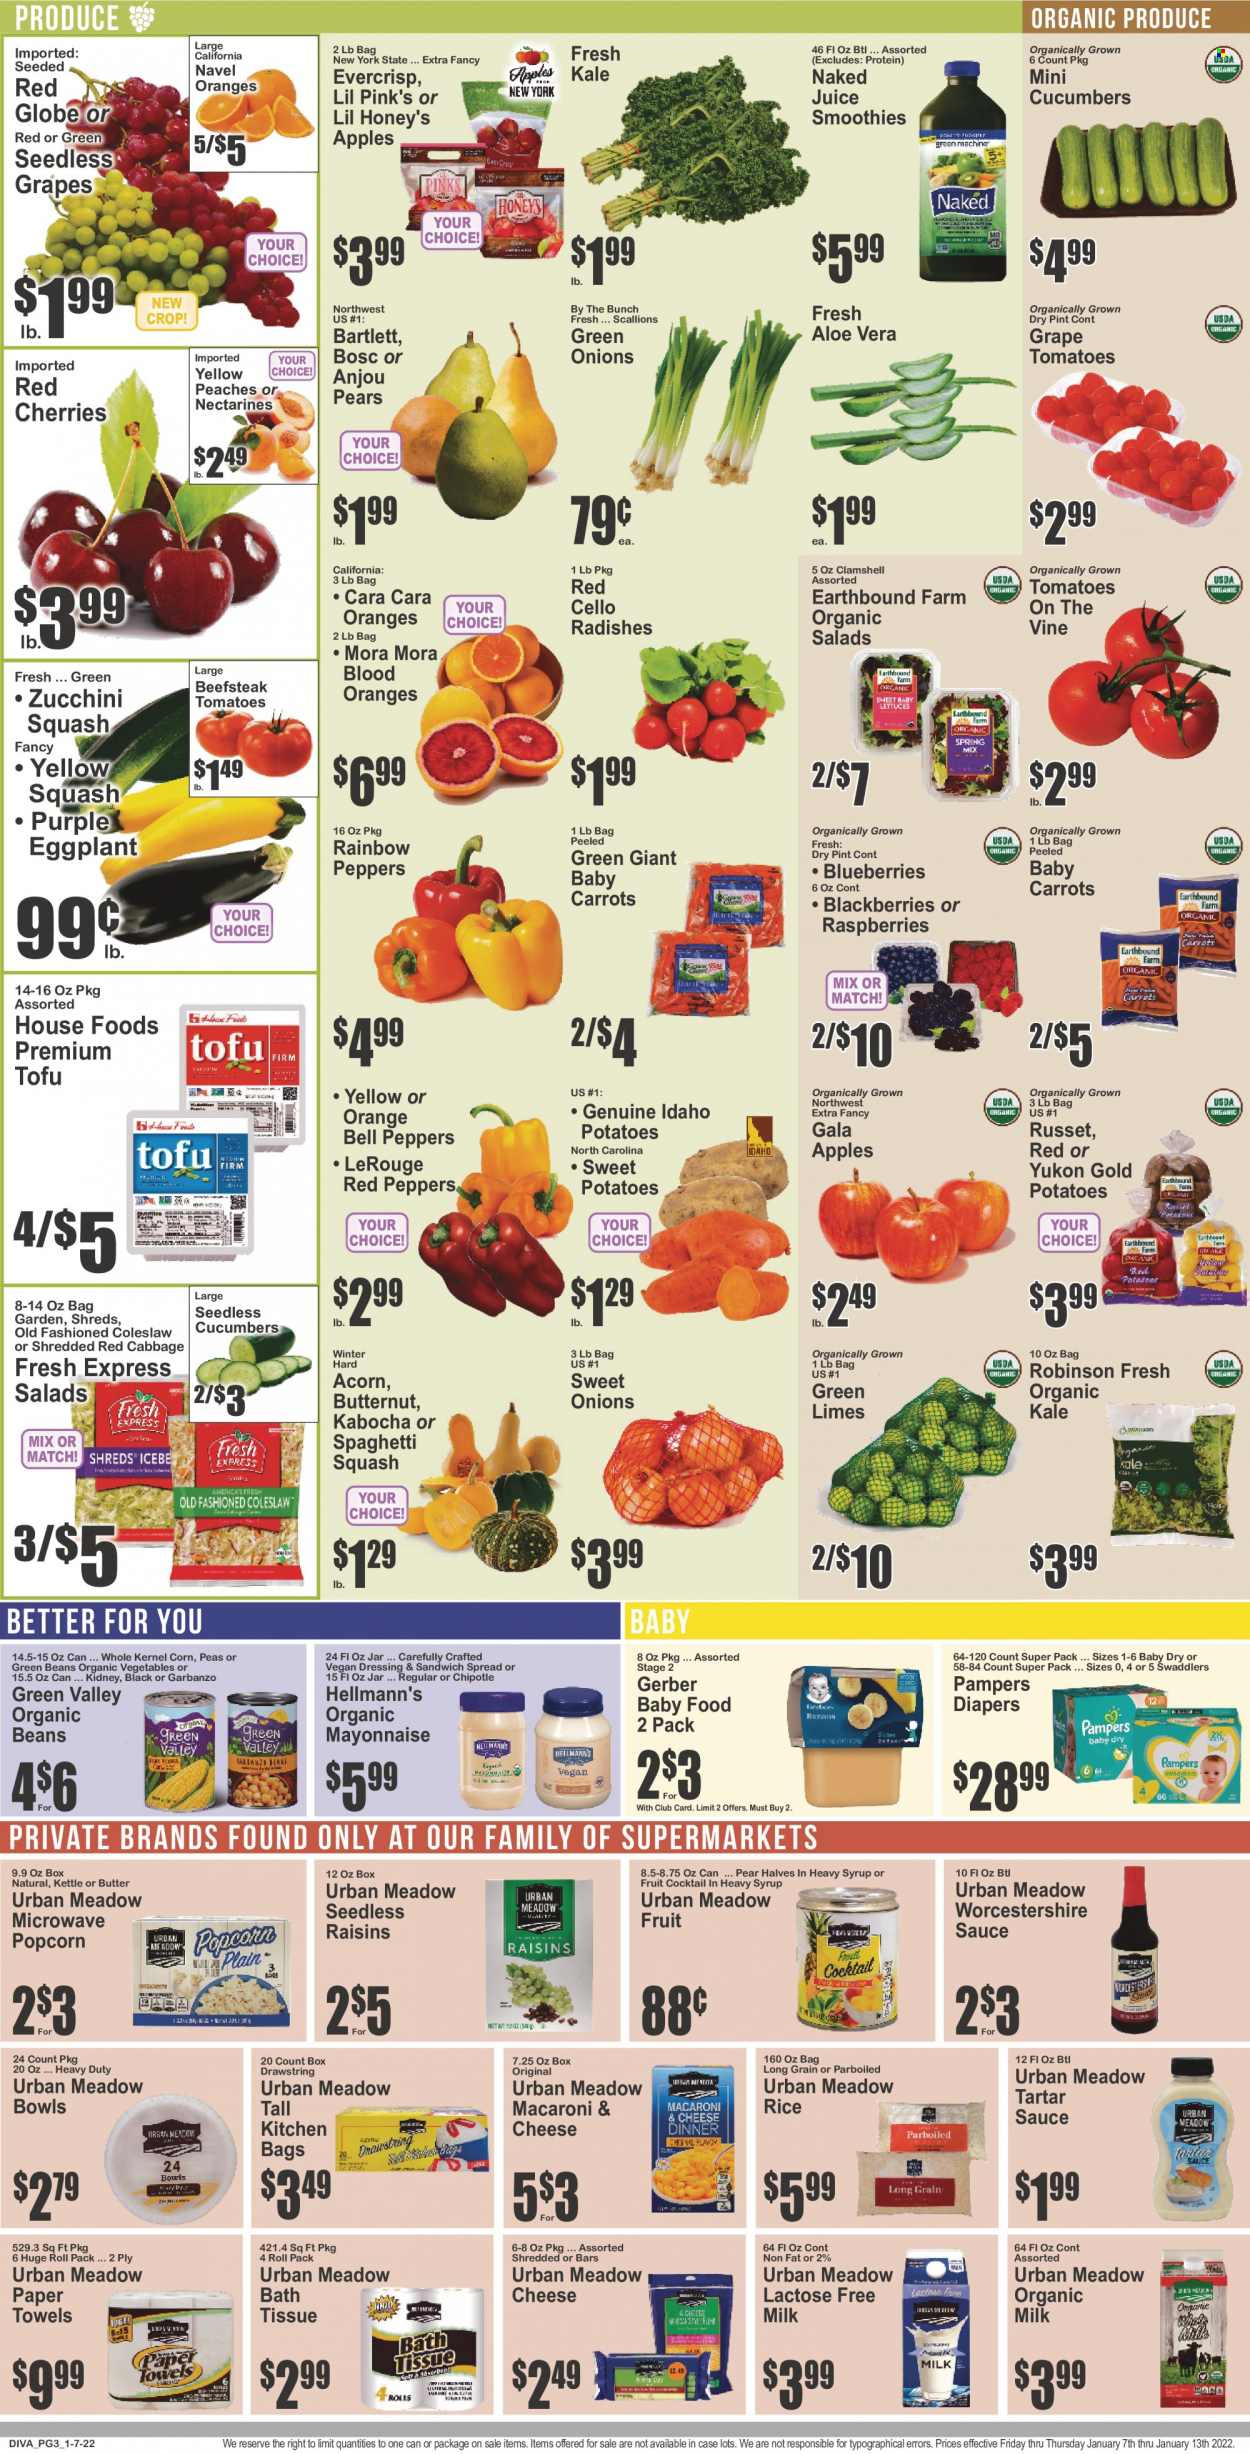 thumbnail - Key Food Flyer - 01/07/2022 - 01/13/2022 - Sales products - seedless grapes, beans, bell peppers, cabbage, carrots, corn, cucumber, green beans, radishes, russet potatoes, tomatoes, zucchini, kale, potatoes, pumpkin, peas, salad, peppers, eggplant, yellow squash, red peppers, apples, blackberries, Gala, limes, Red Globe, cherries, pears, oranges, coleslaw, macaroni & cheese, sandwich, tofu, organic milk, lactose free milk, butter, mayonnaise, tartar sauce, Hellmann’s, Gerber, popcorn, rice, worcestershire sauce, dressing, honey, syrup, raisins, dried fruit, juice, smoothie, Pampers, nappies, bath tissue, kitchen towels, paper towels, butternut squash, nectarines, peaches, navel oranges. Page 3.